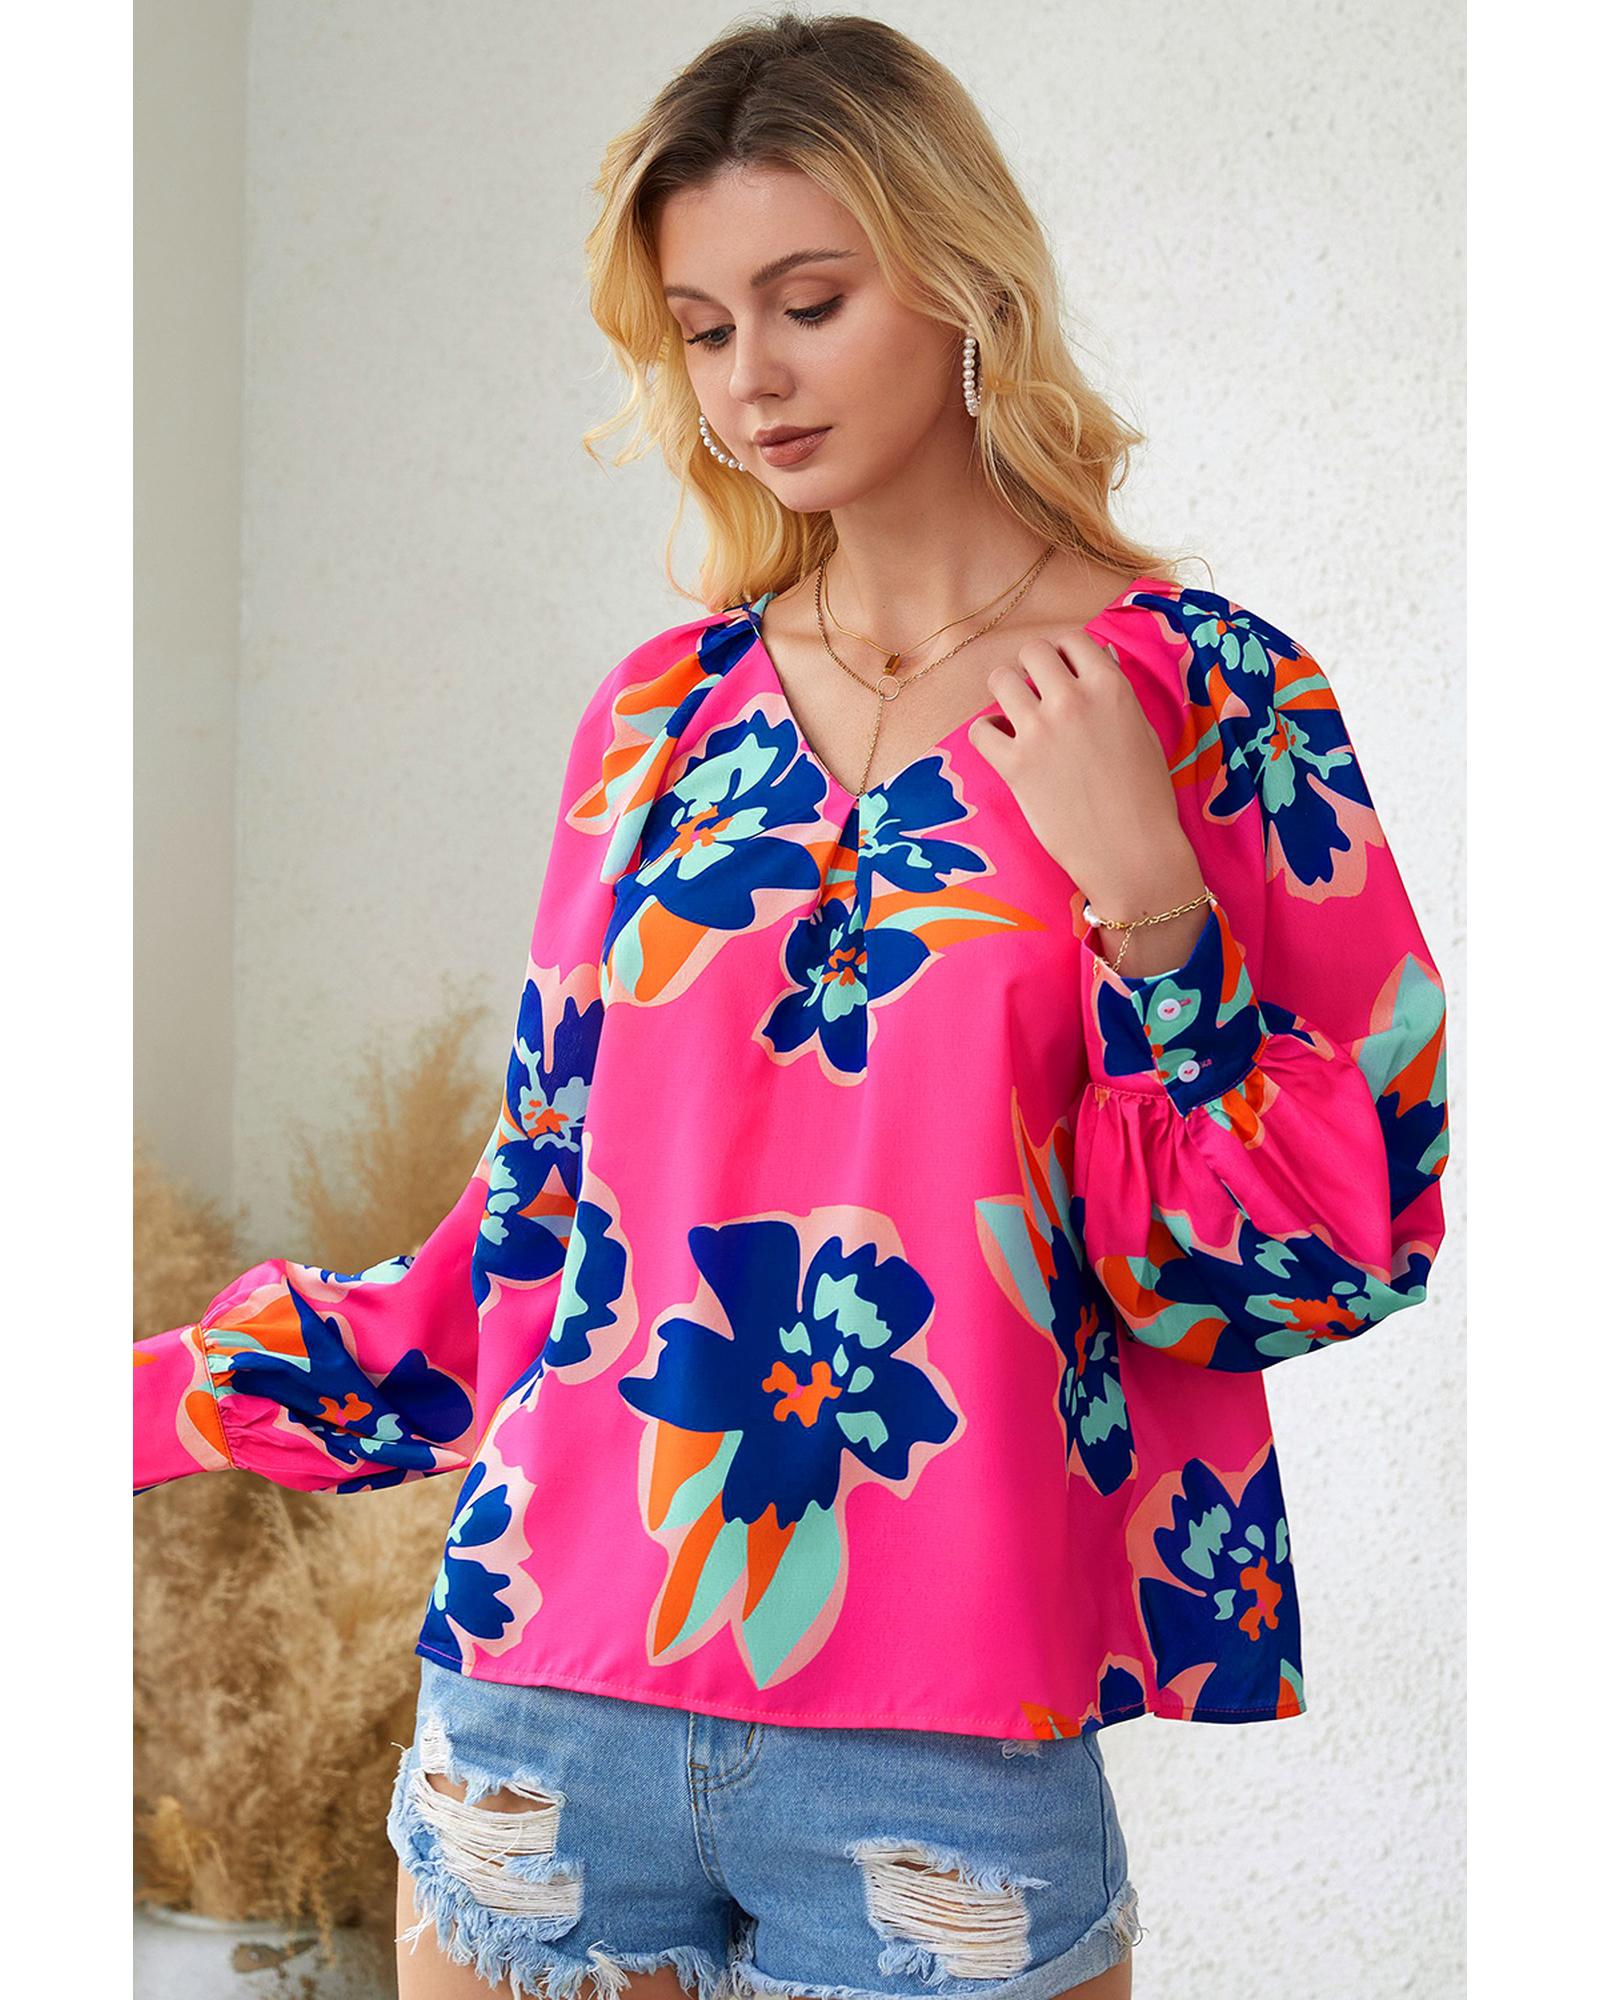 Azura Exchange Puff Sleeve Blouse with Flower Print - M